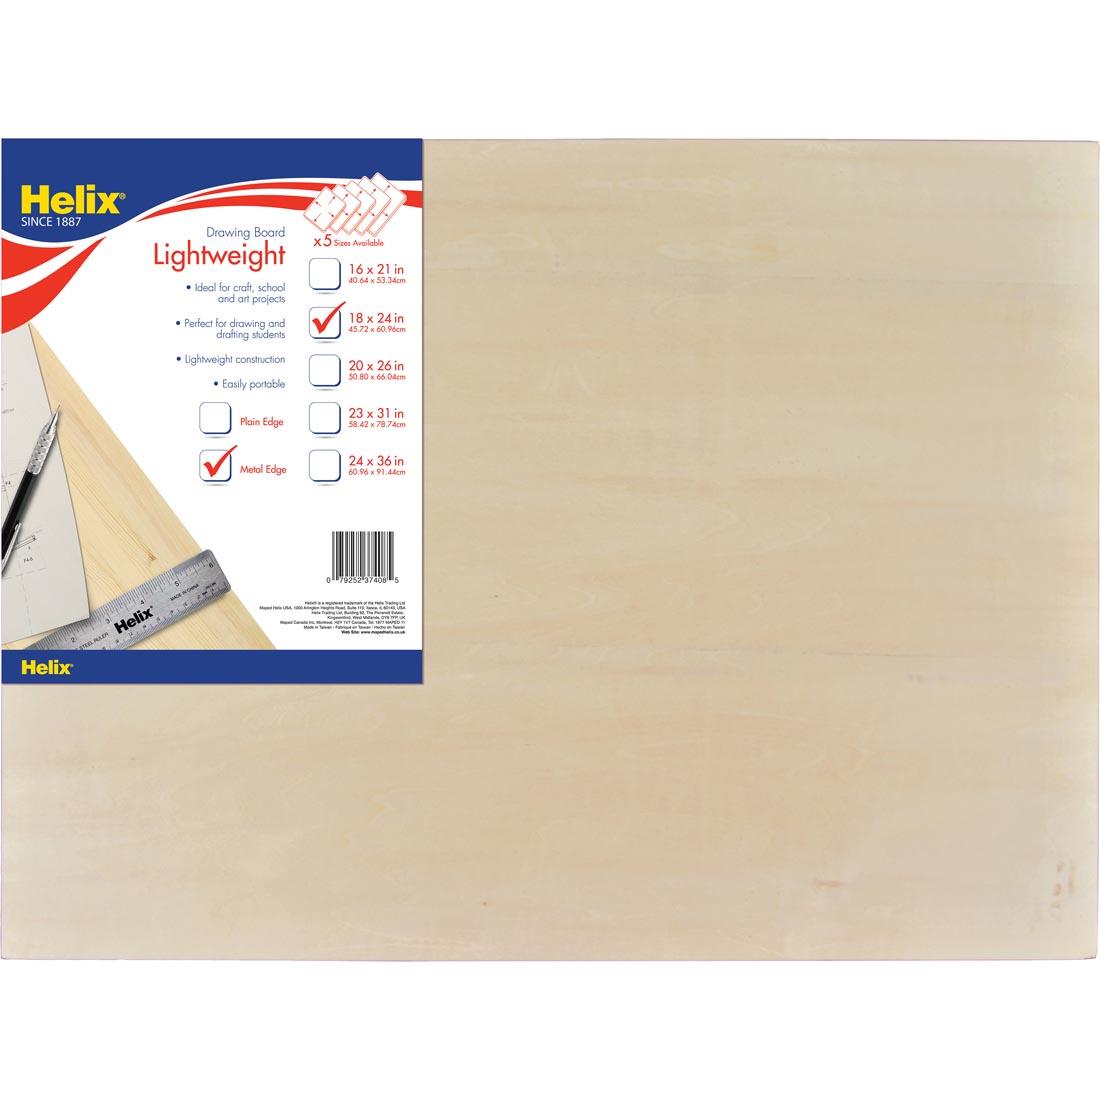 Helix Air-Tite 18x24" Metal Edge Wooden Drawing Board